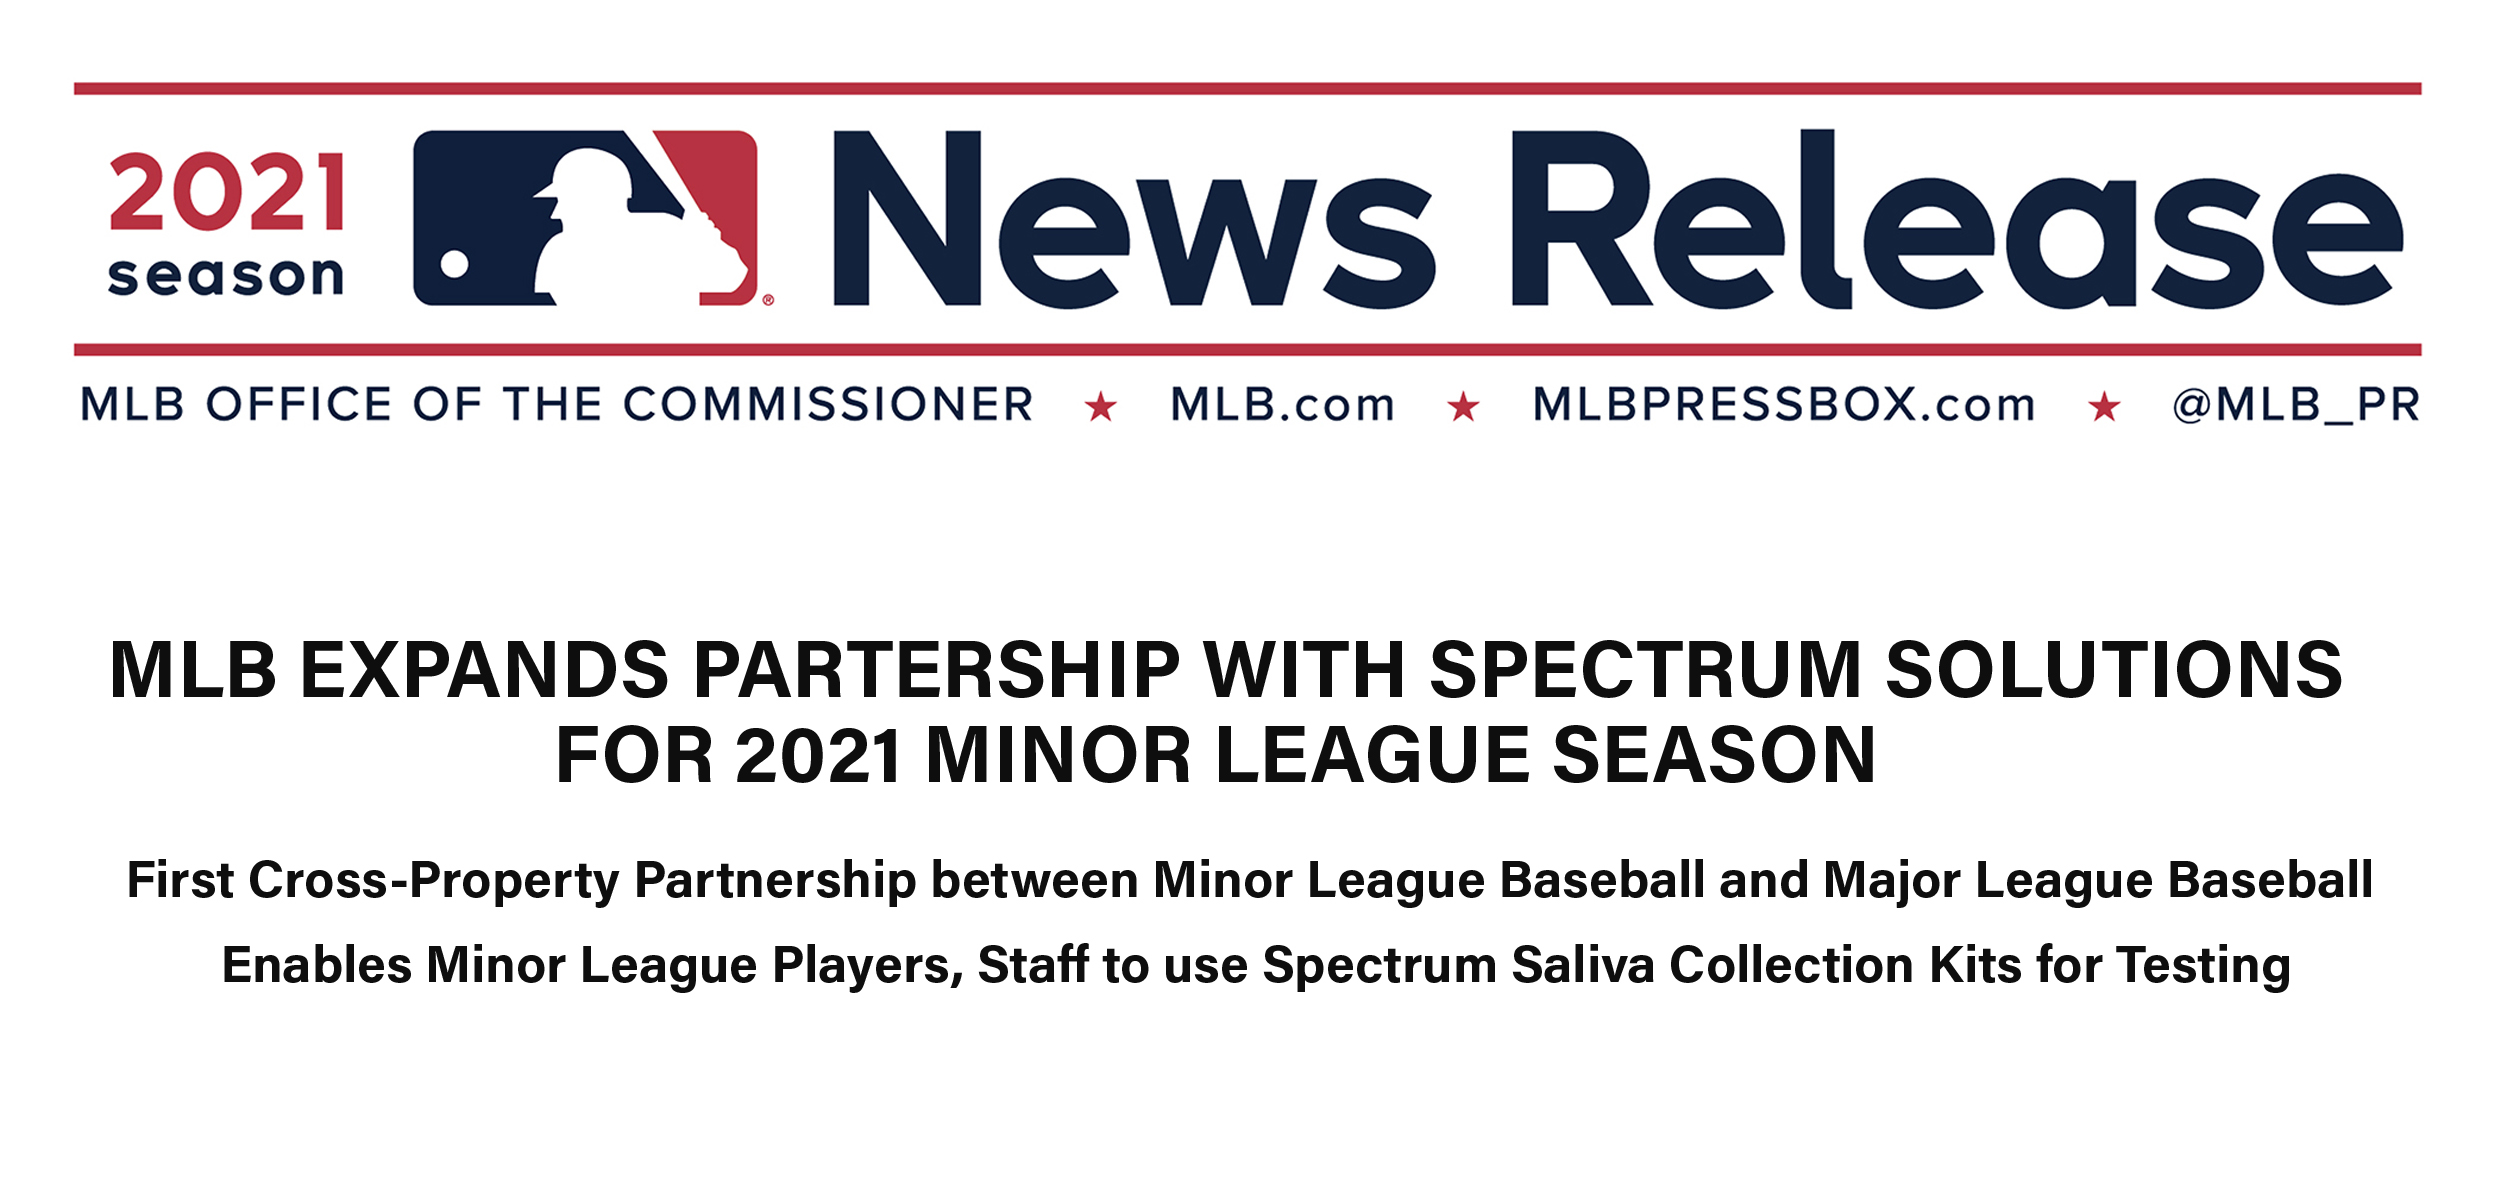 MLB EXPANDS PARTNERSHIP WITH SPECTRUM SOLUTIONS FOR 2021 MINOR LEAGUE SEASON